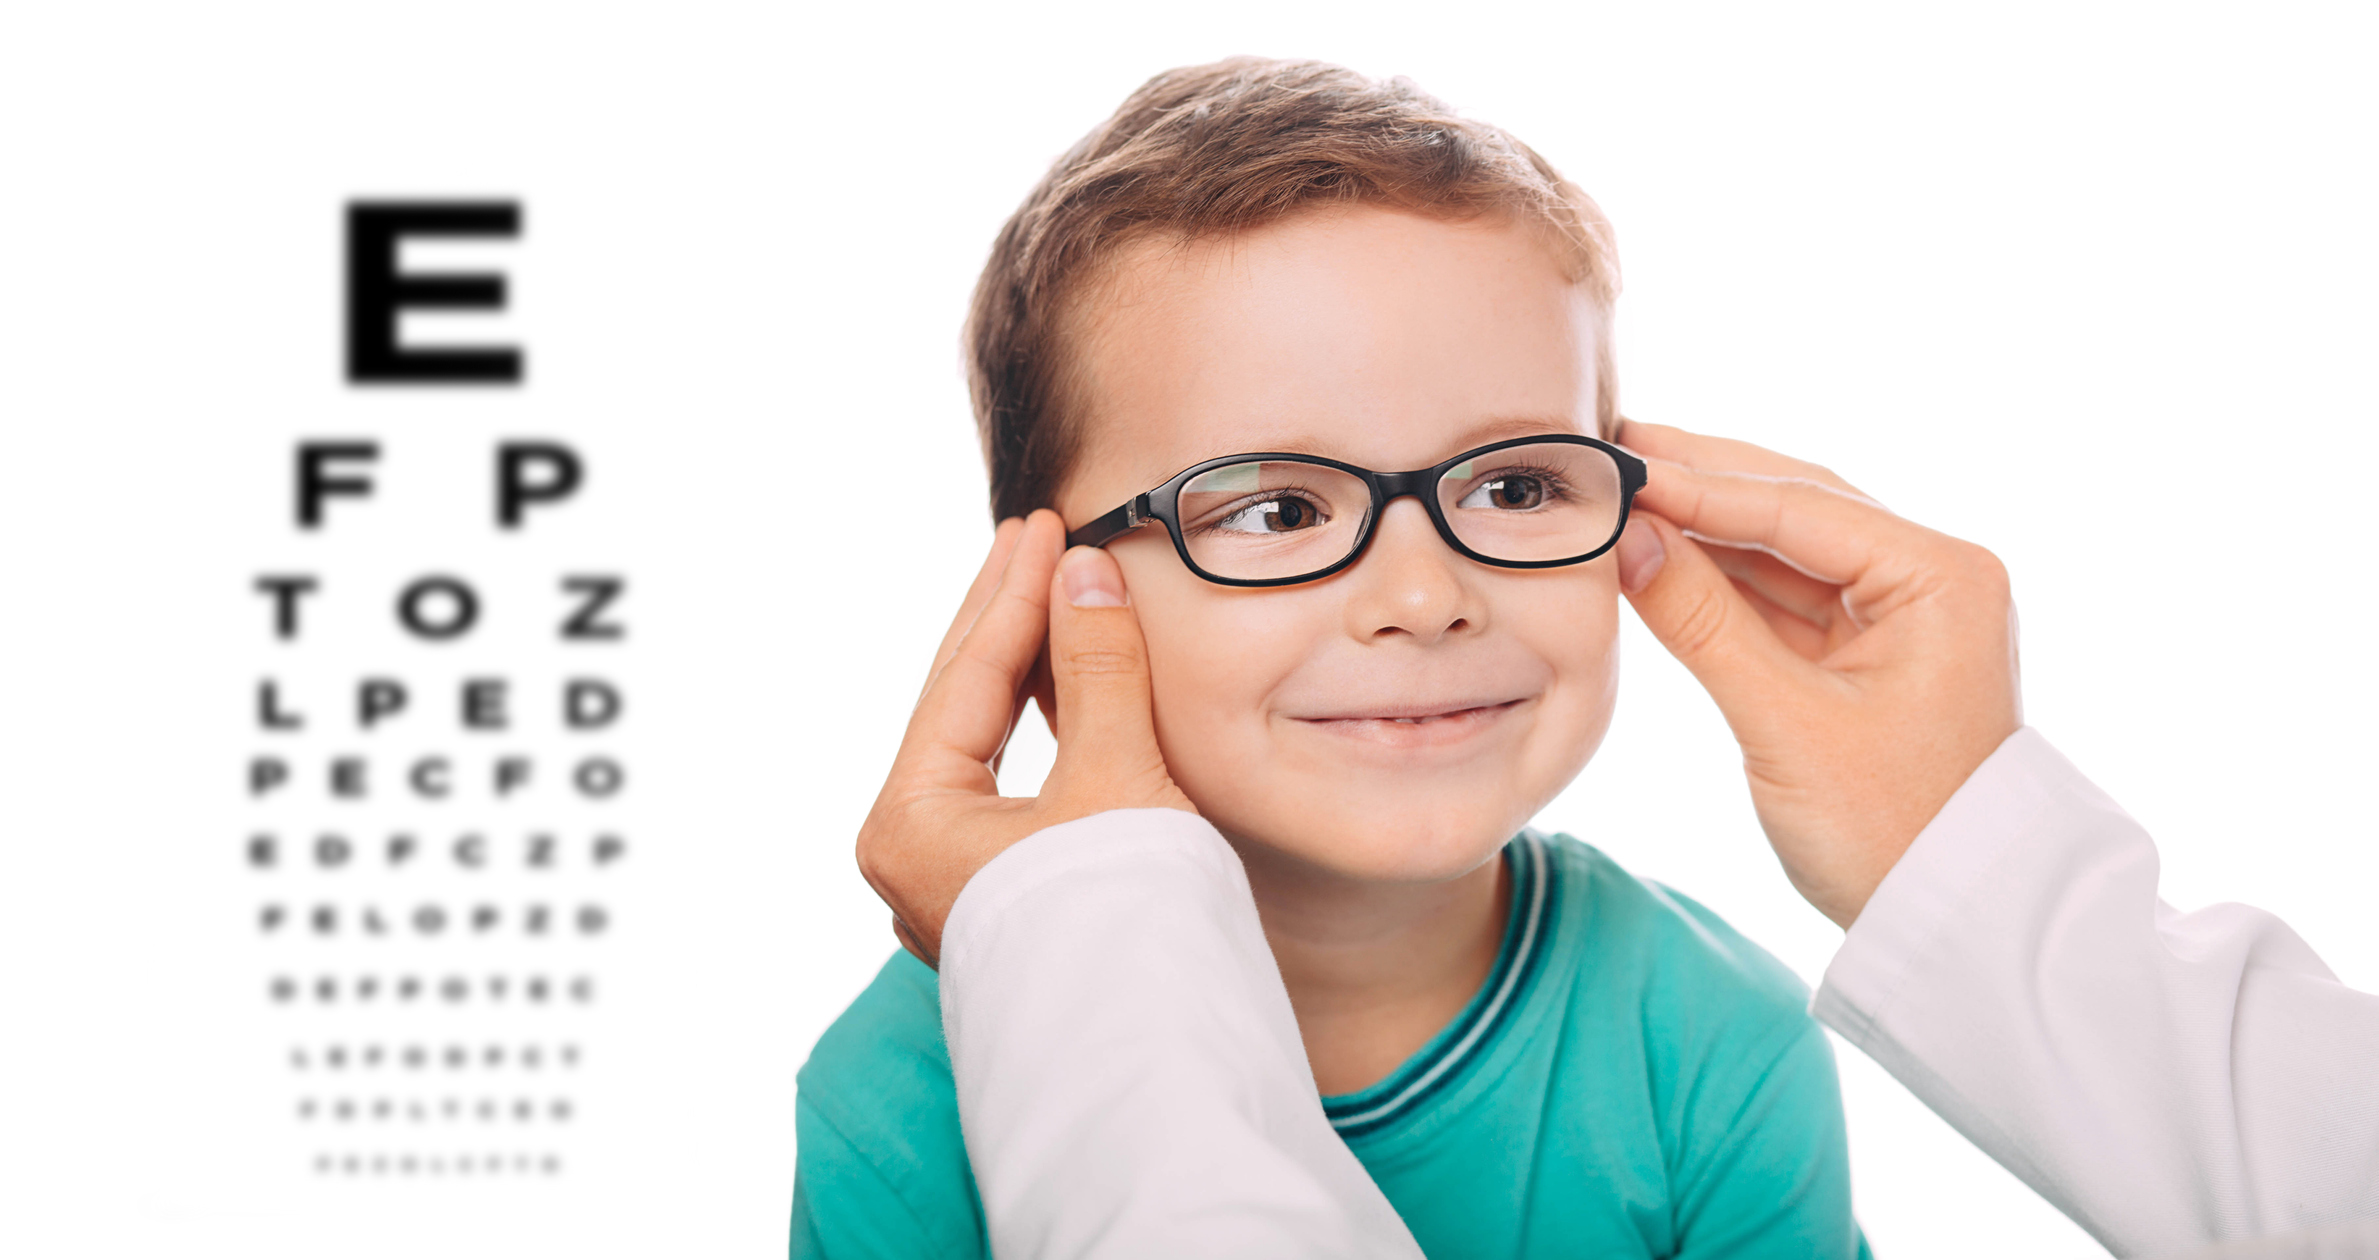 Optometrist is putting new glasses on Little boy face